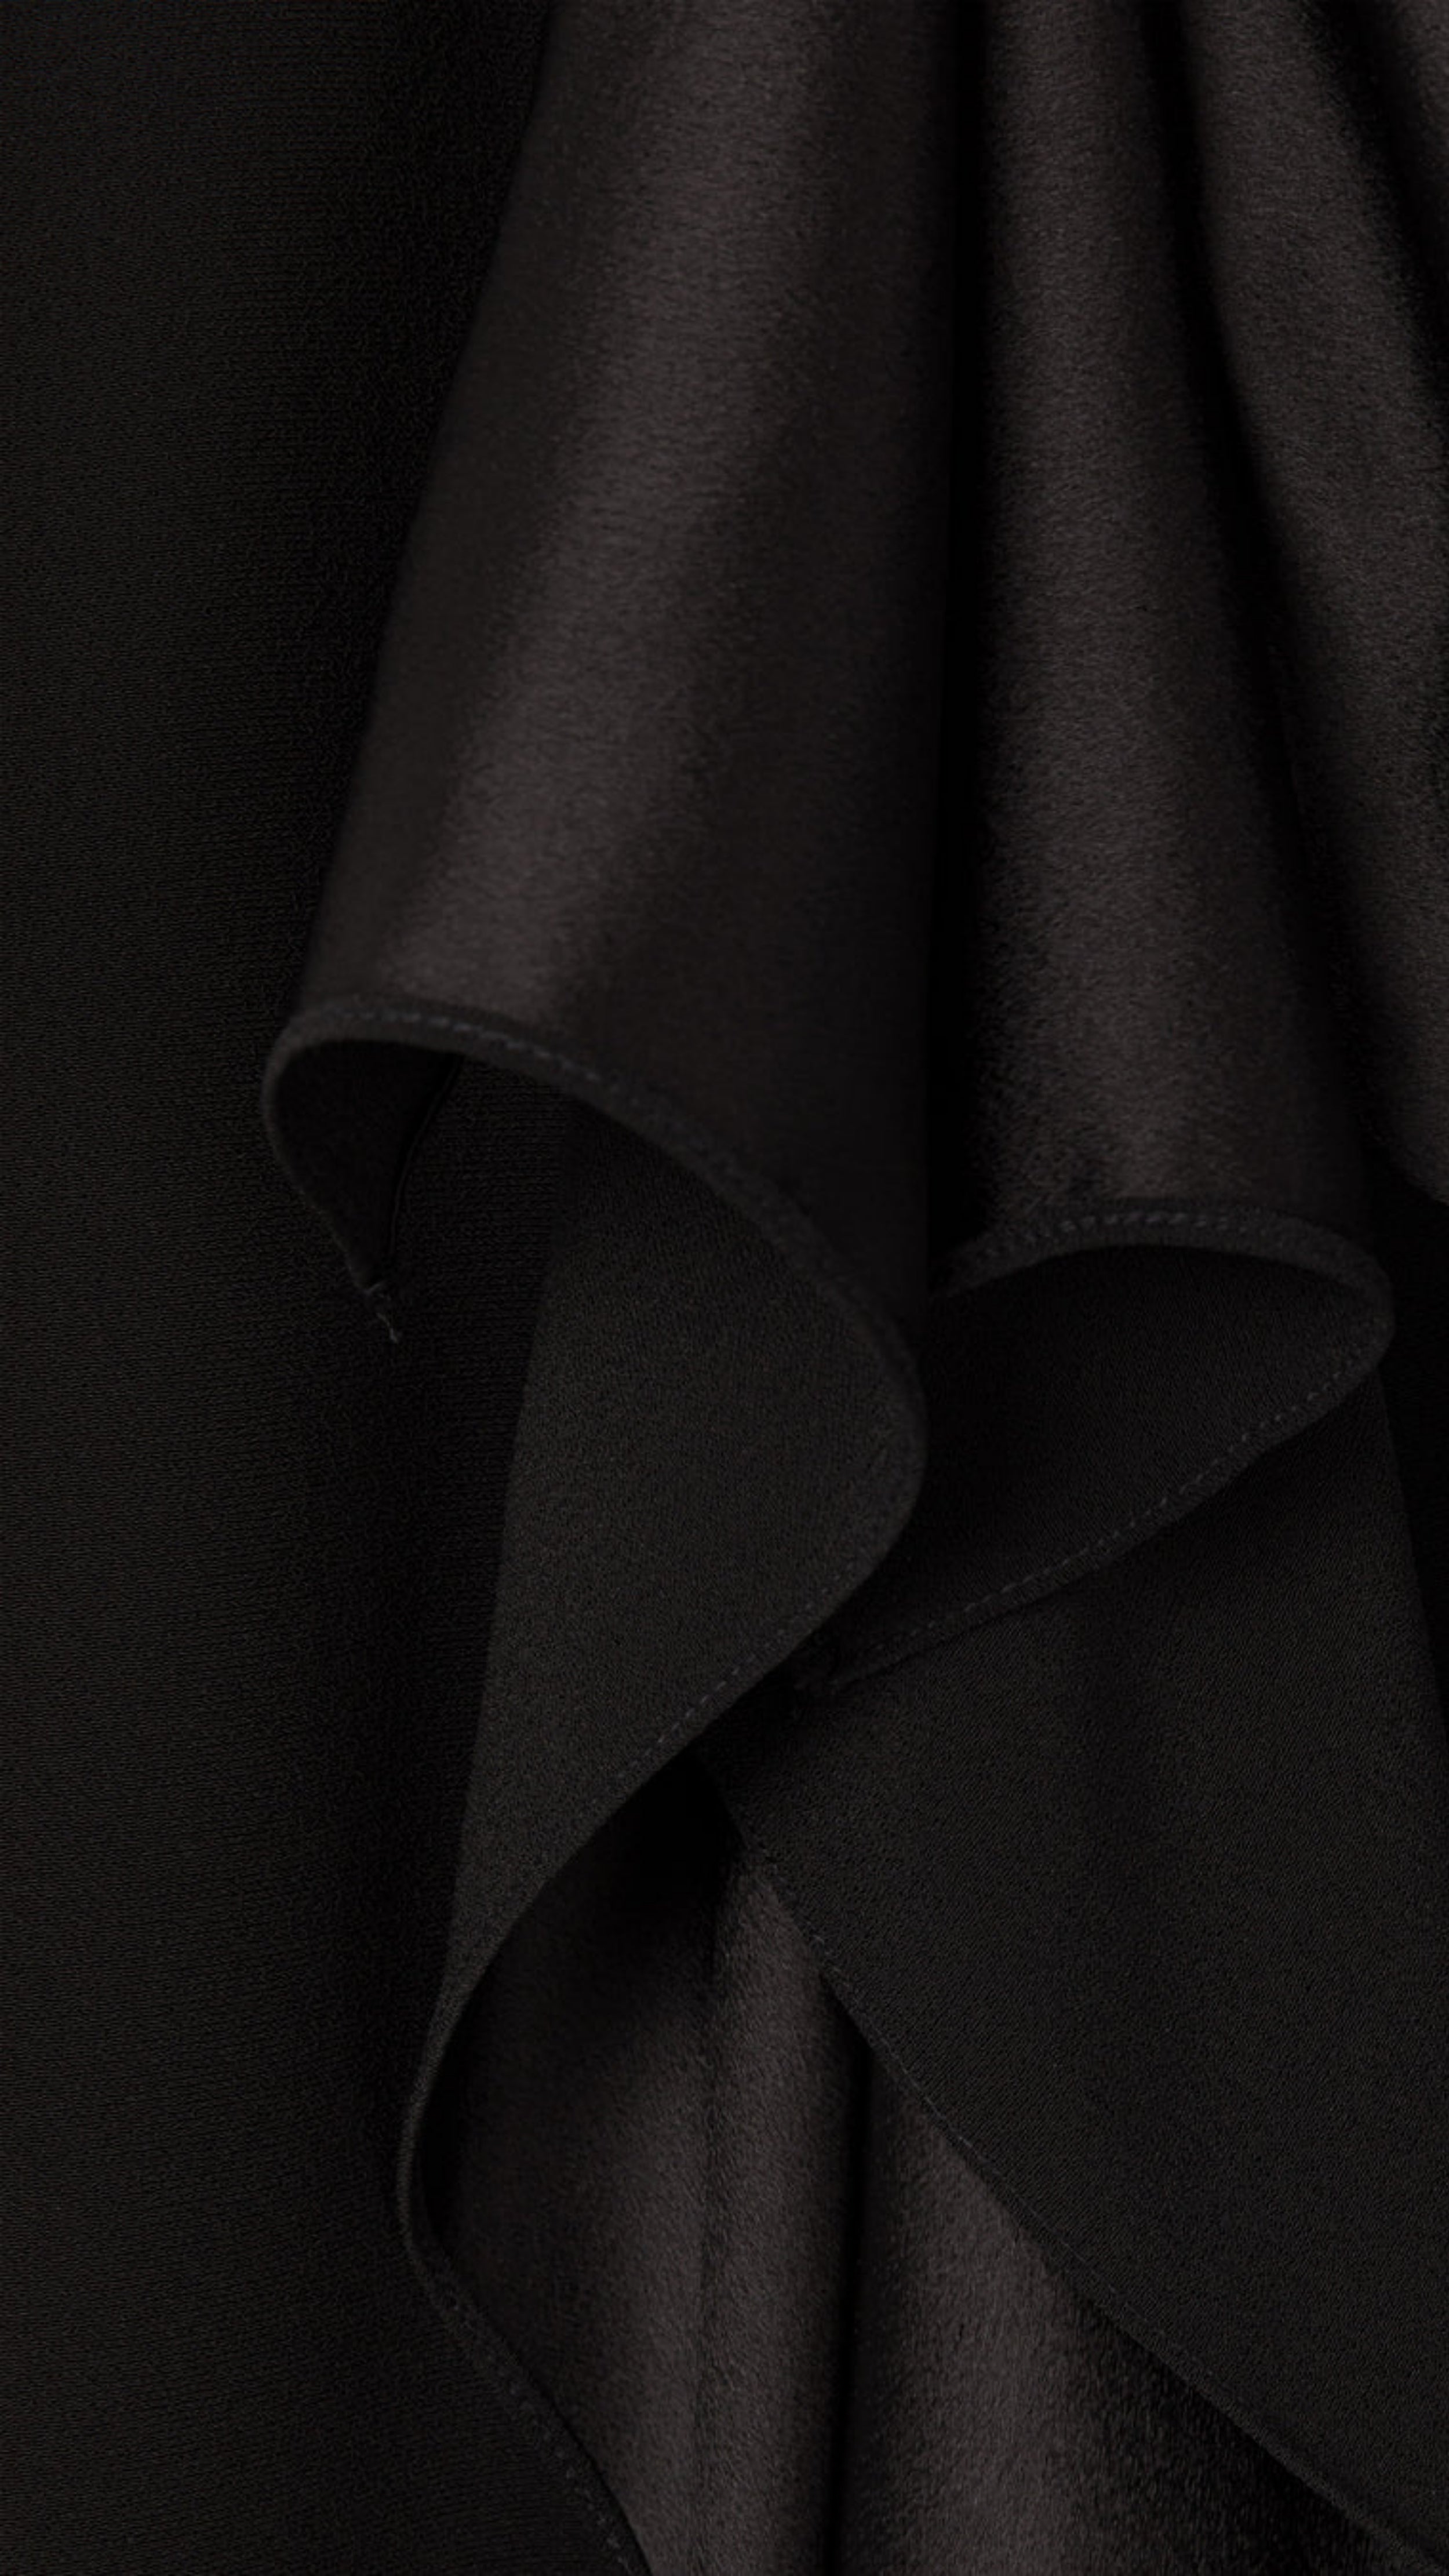 AZ Factory Colville Molly Molloy Lucinda Chambers, Ruffled Crepe Skirt in Black A sleek midi length skirt crafted from a mix of crepe and satin, complemented by a fold-over belt and delicate ruffling along the front panel. Close up of material fabric